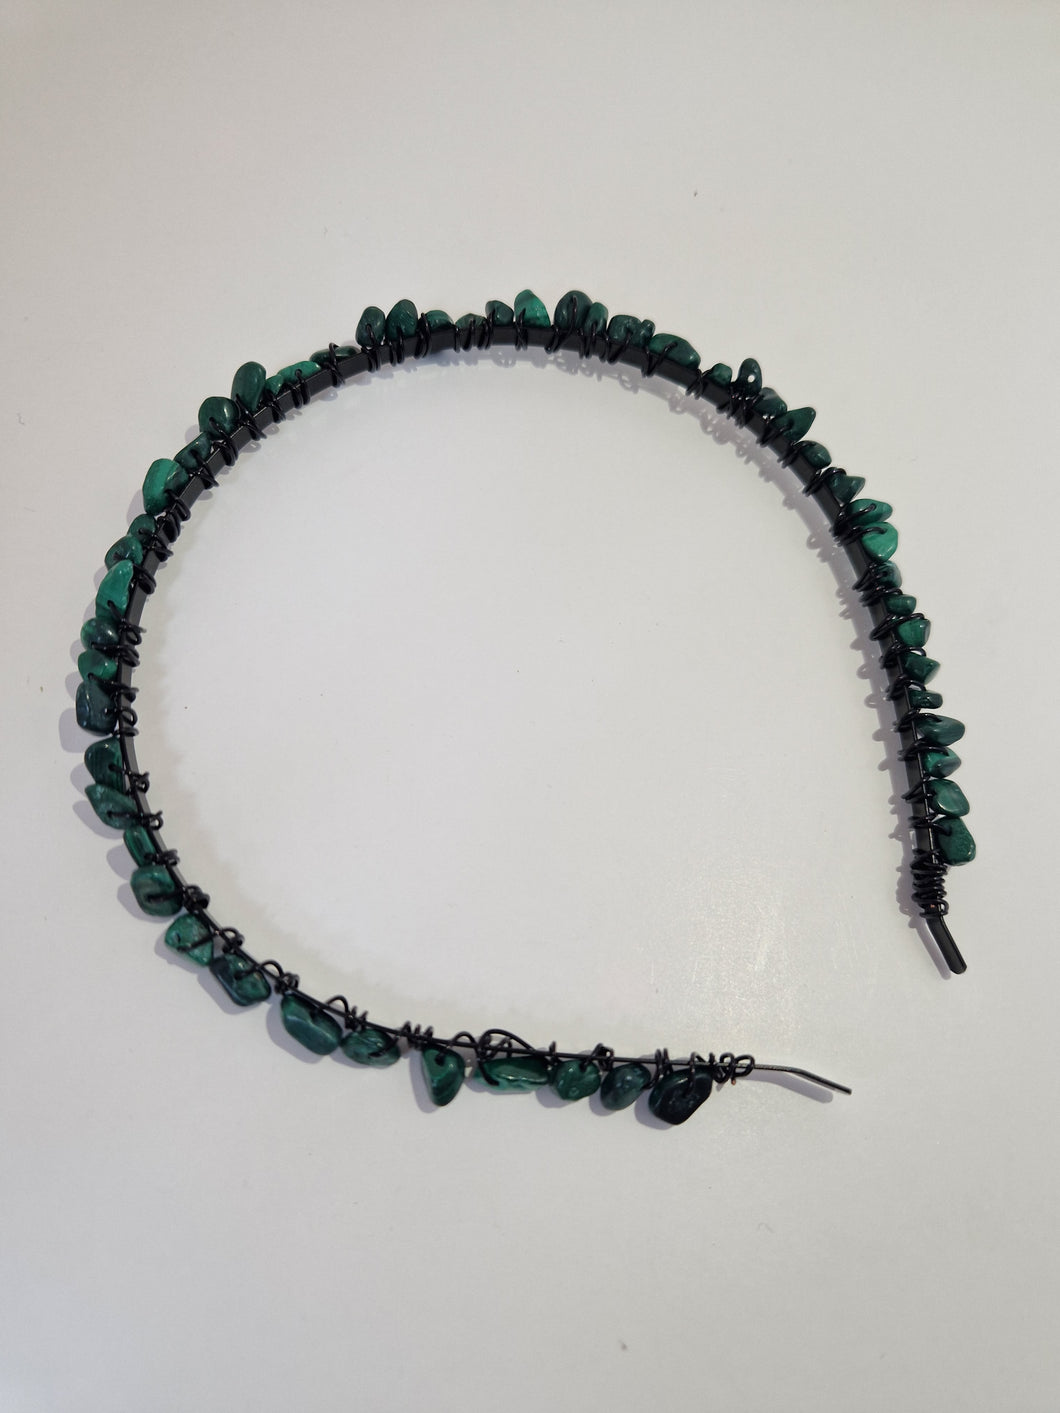 Gemstone Hairbands By Teresa Maire